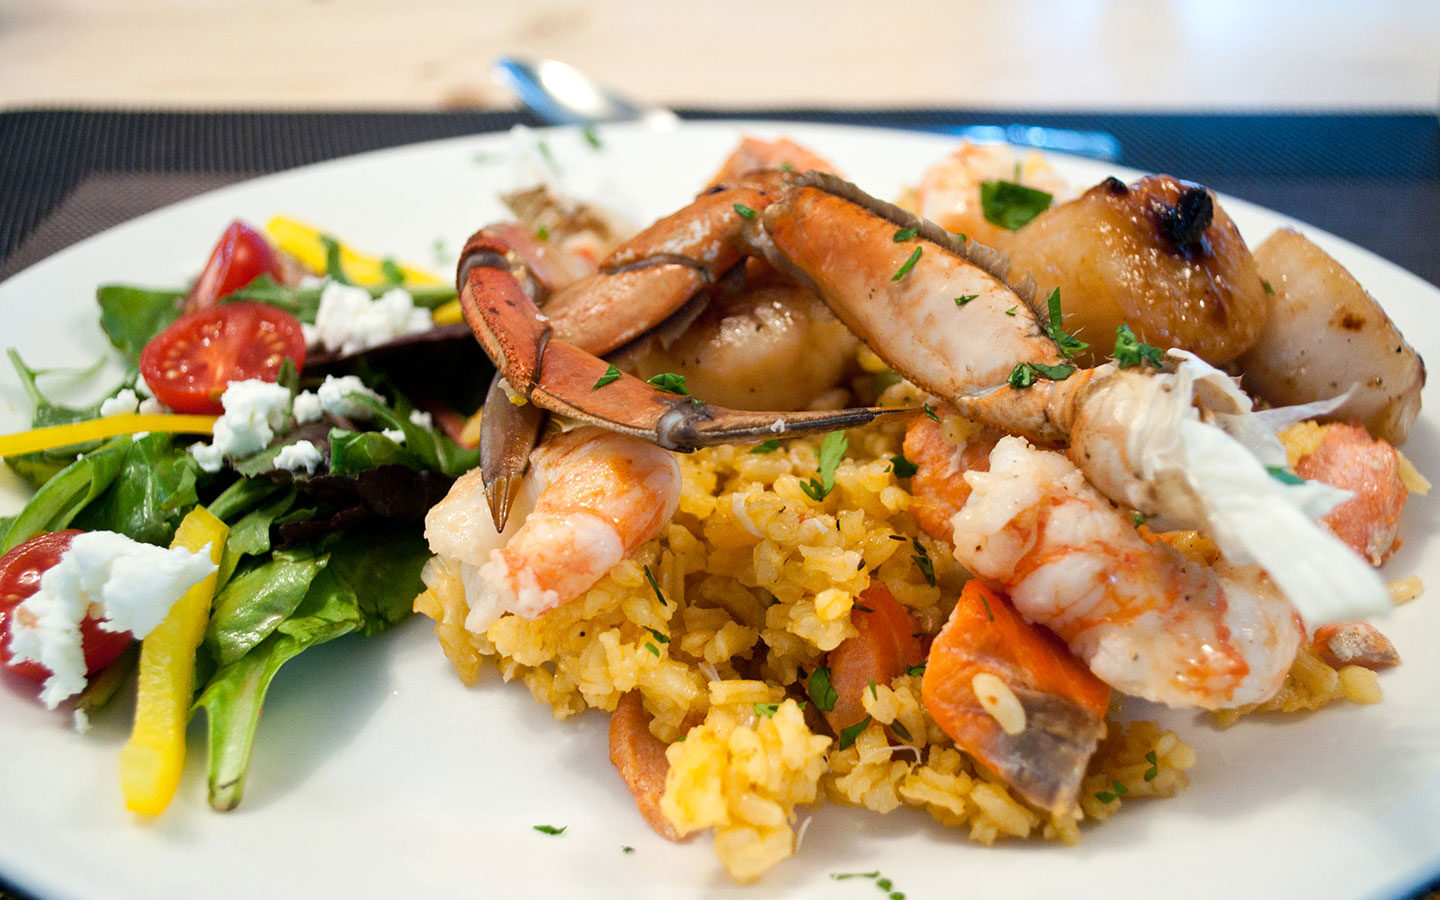 Seafood paella – one of the dishes cooked at the Great Bear Lodge